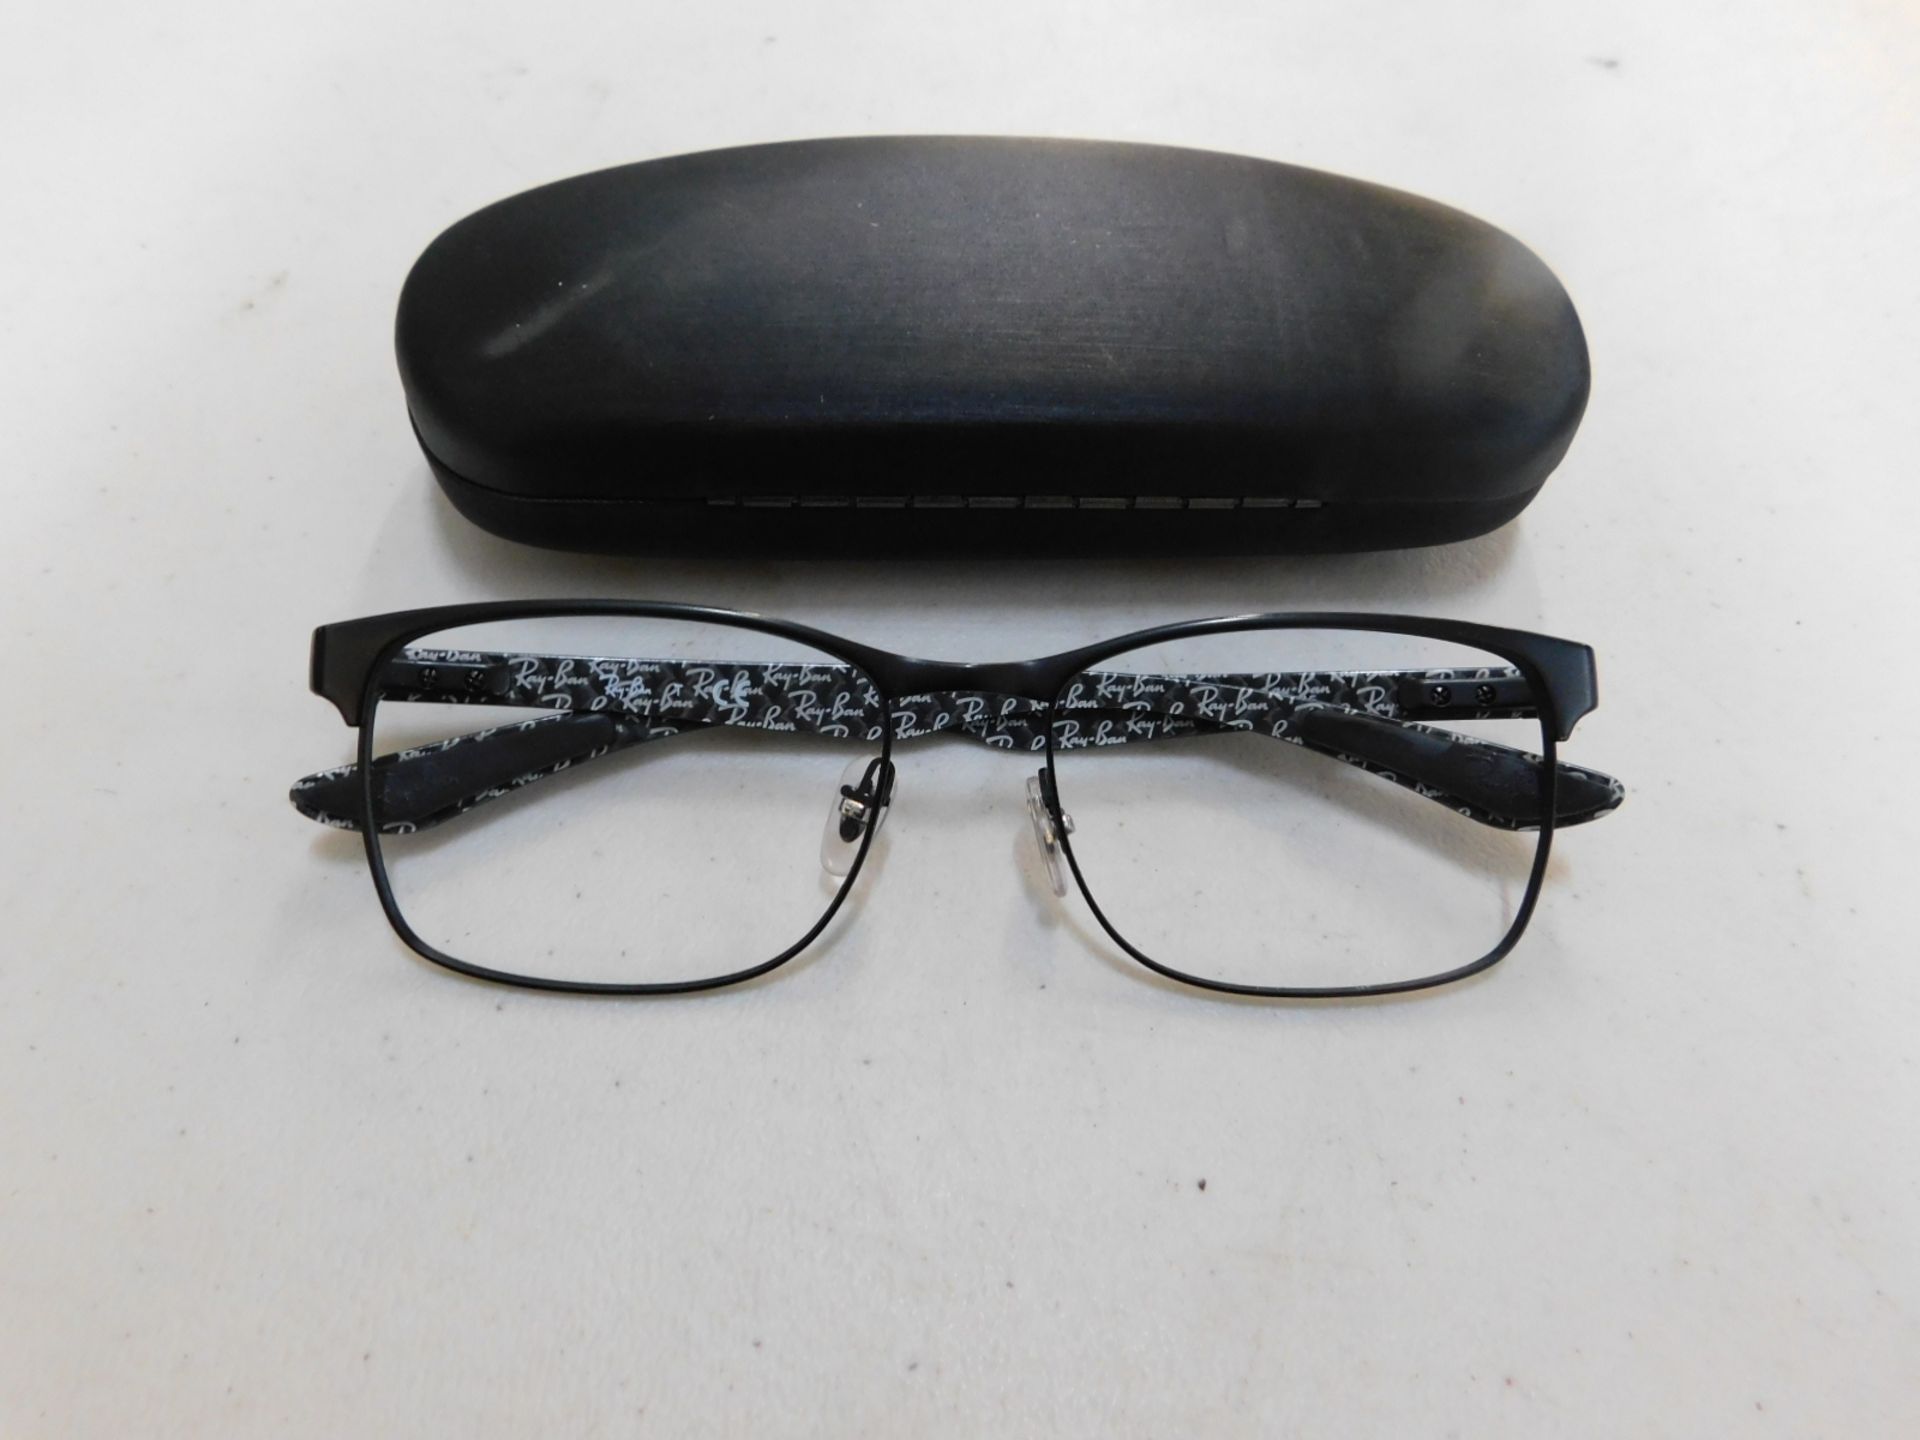 1 PAIR OF RAYBAN GLASSES FRAME MODEL RB6420 RRP Â£79.99